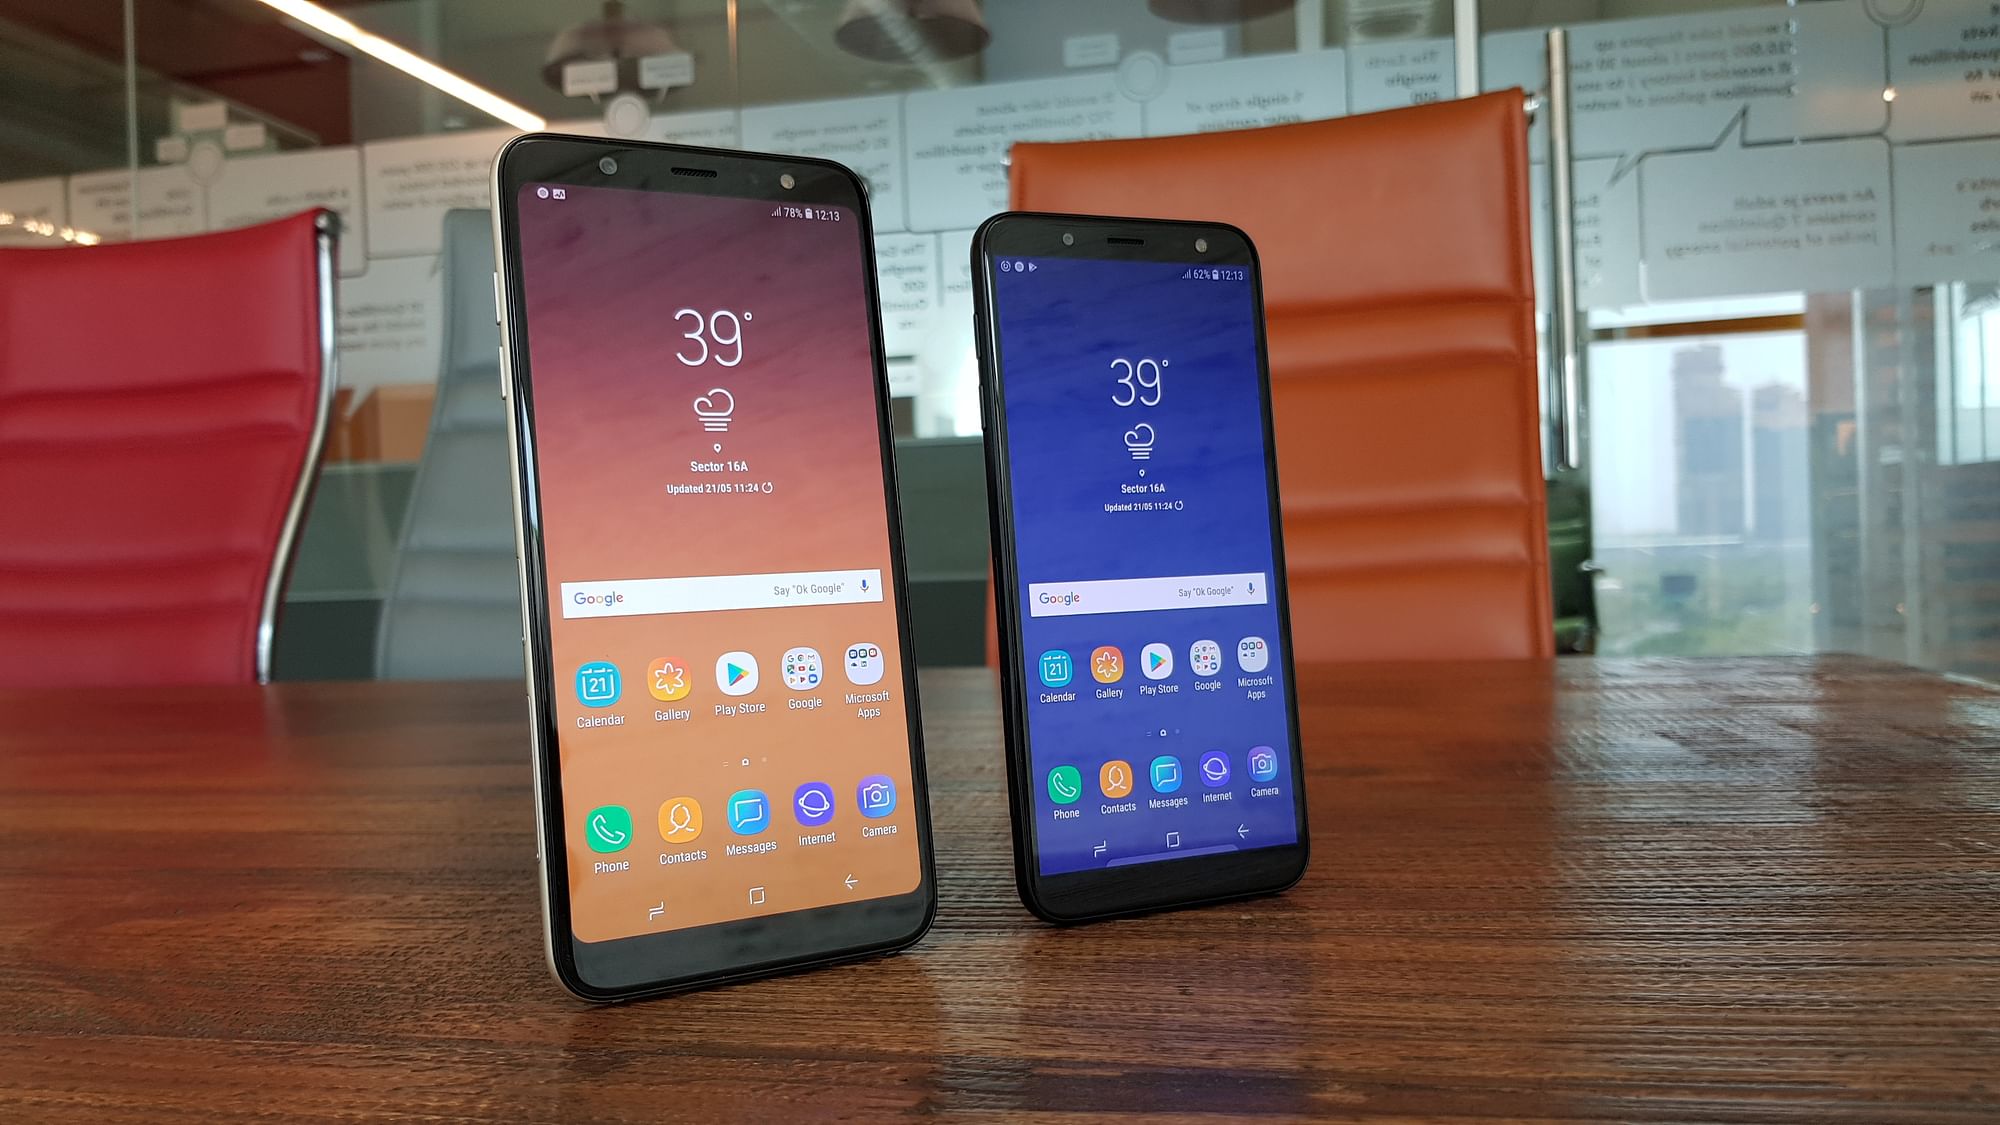 The Samsung A6+ (left) and J6 (right)